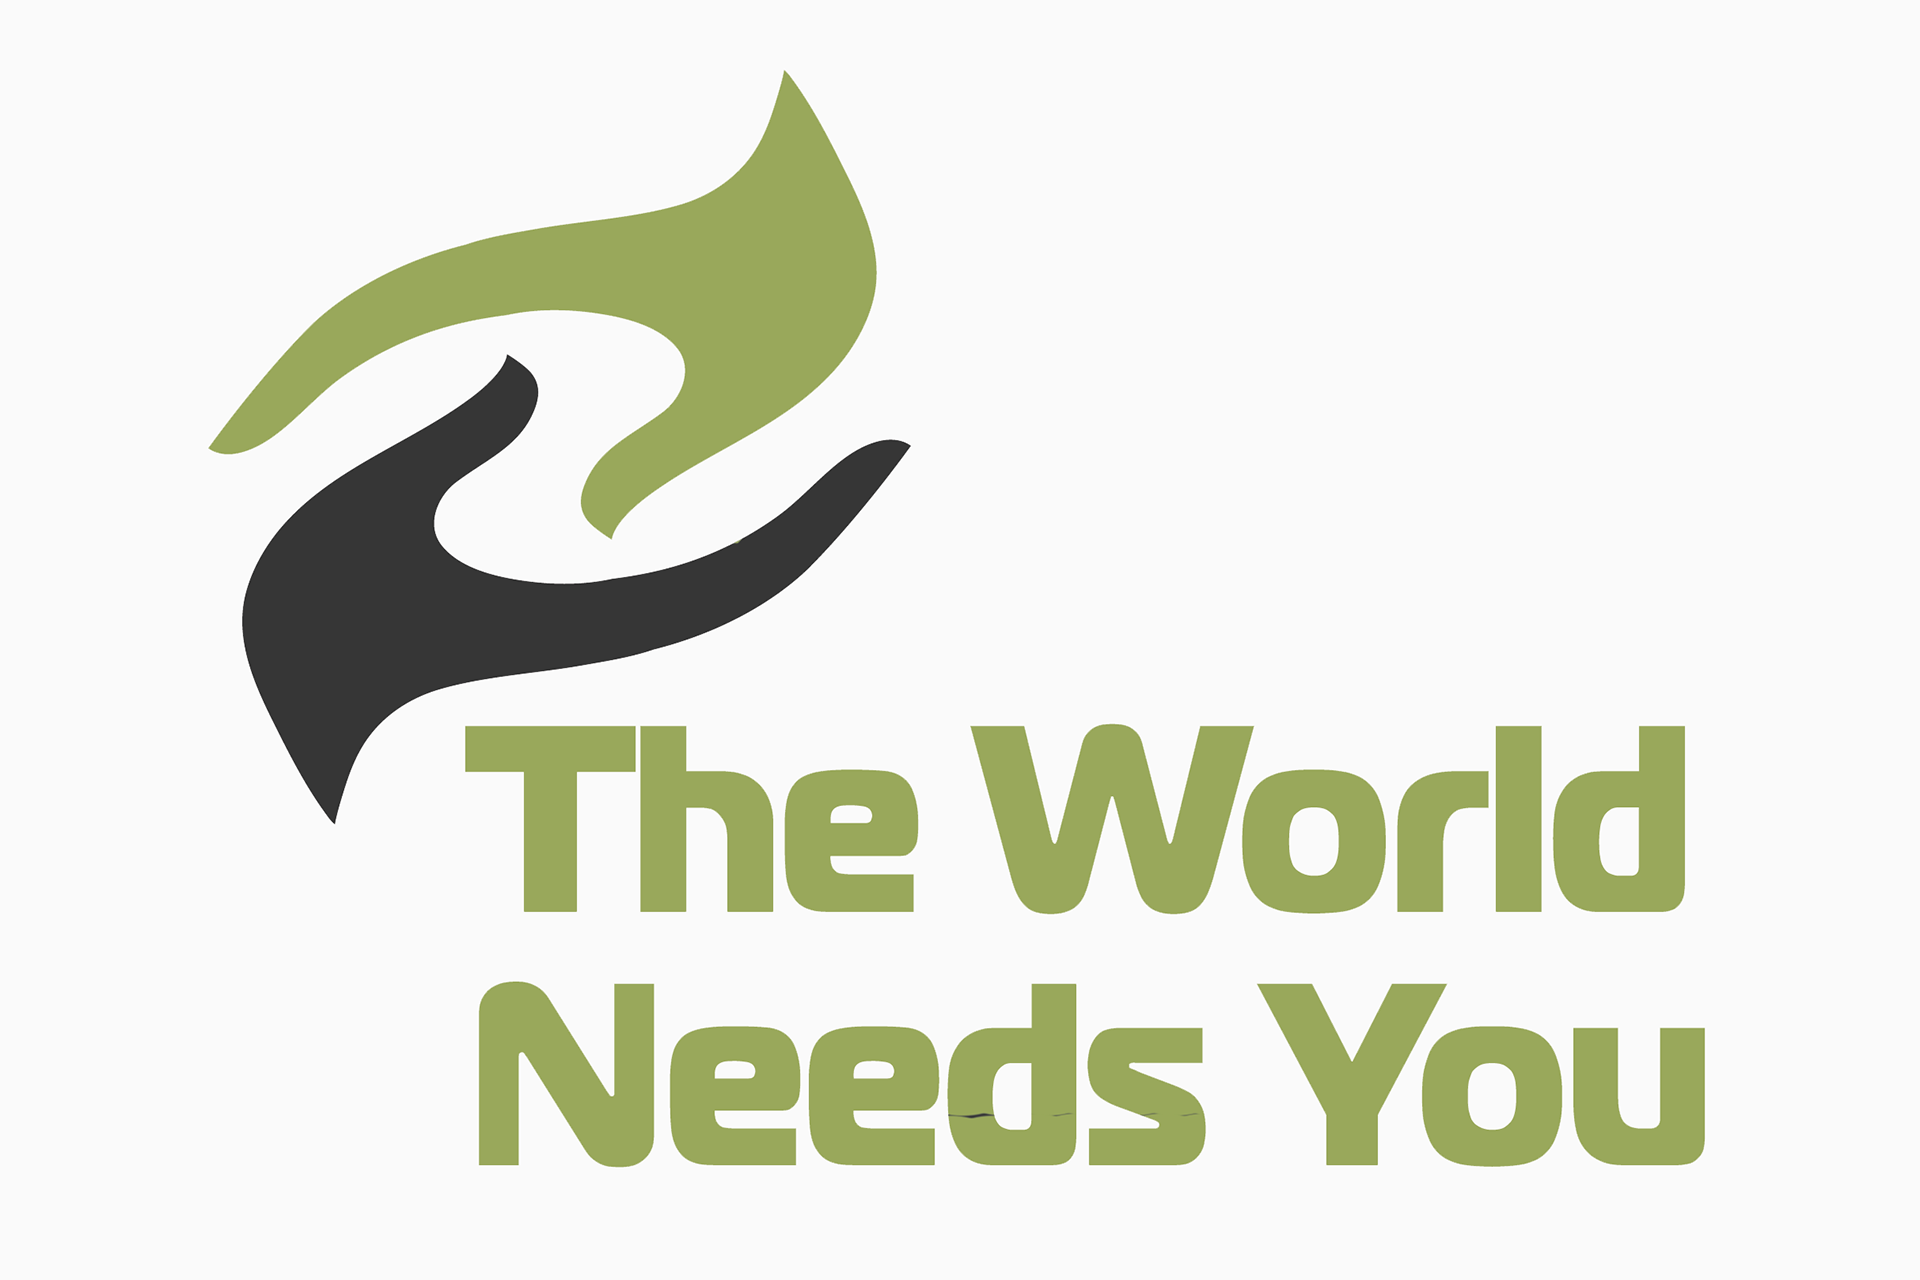 The world needs you!